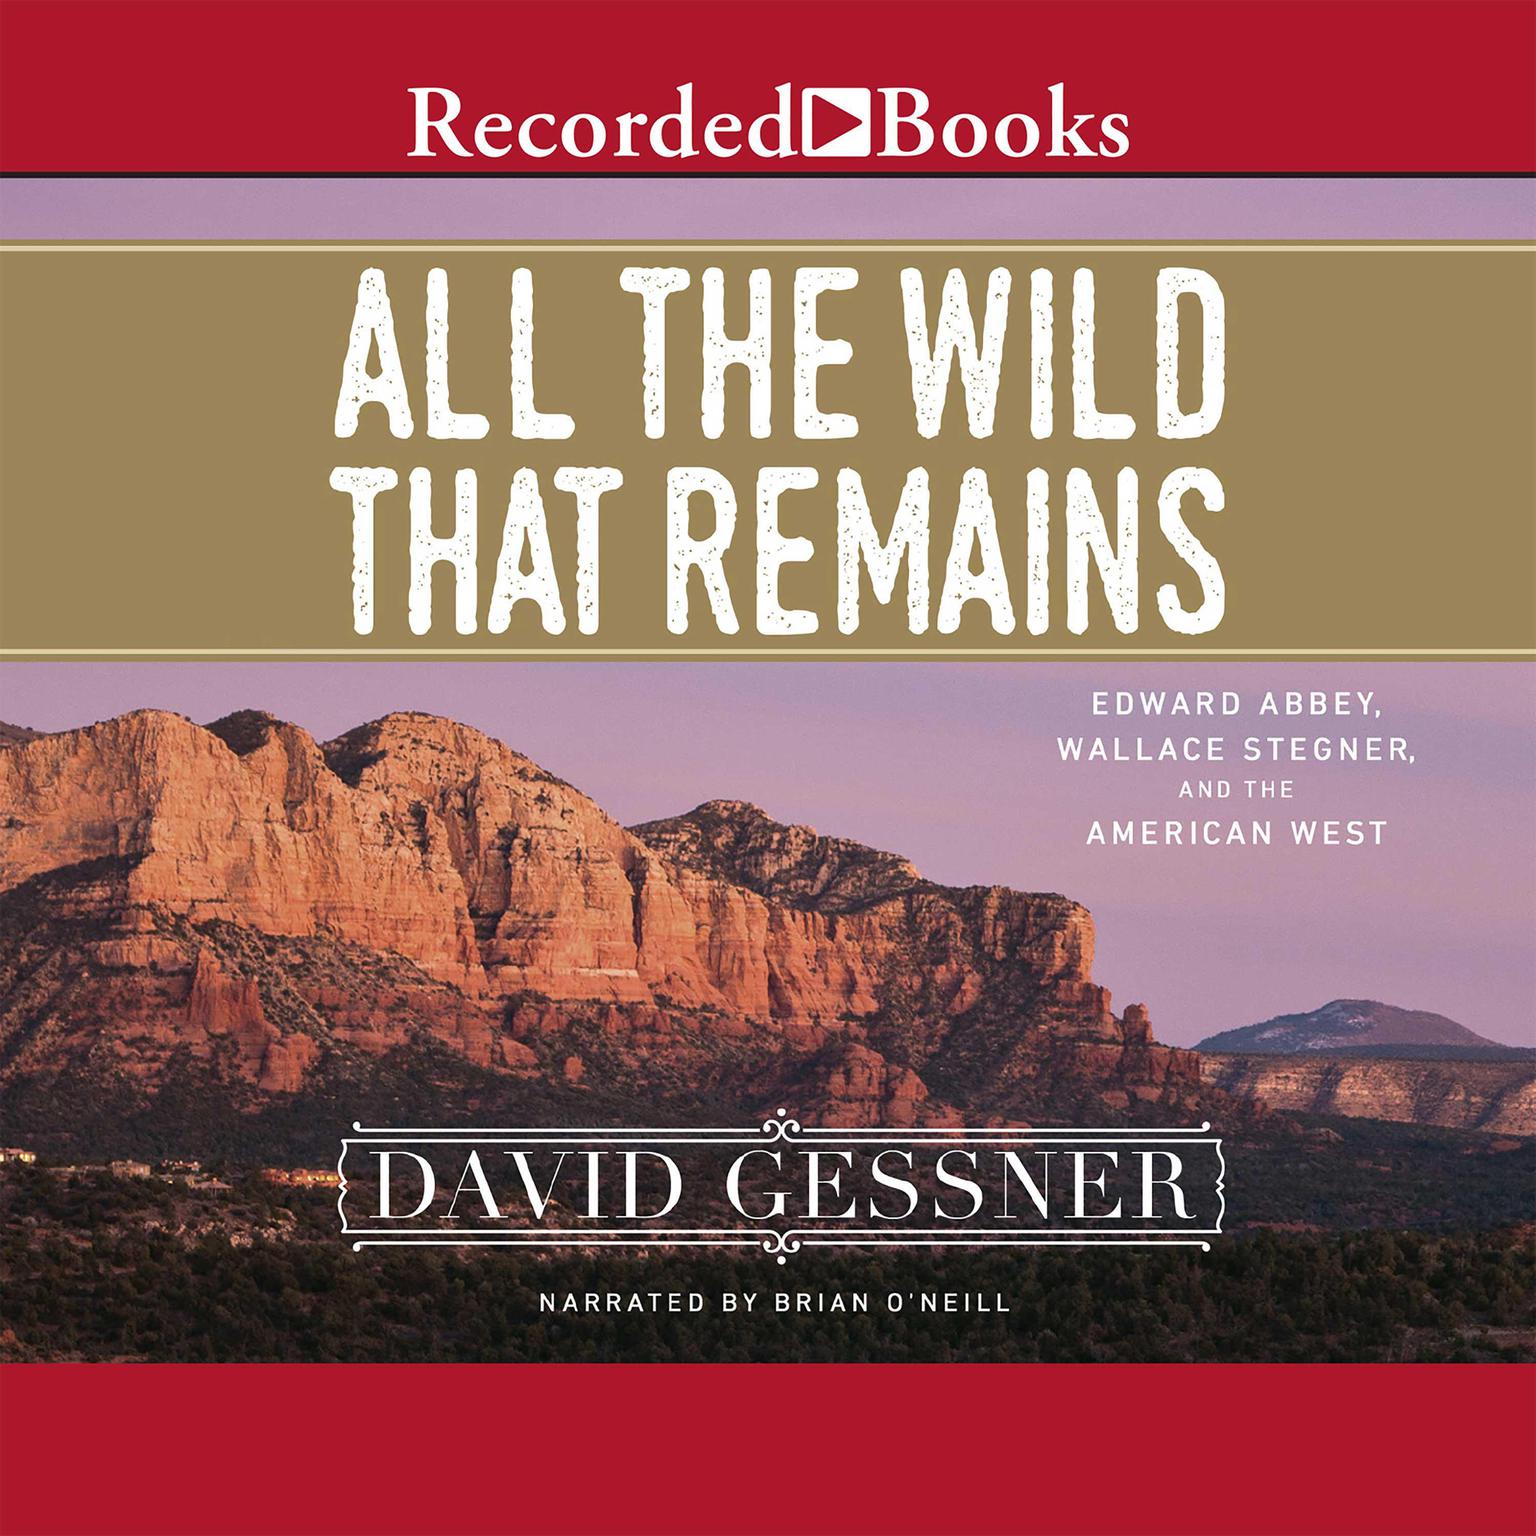 All the Wild That Remains: Edward Abbey, Wallace Stegner, and the American West Audiobook, by David Gessner